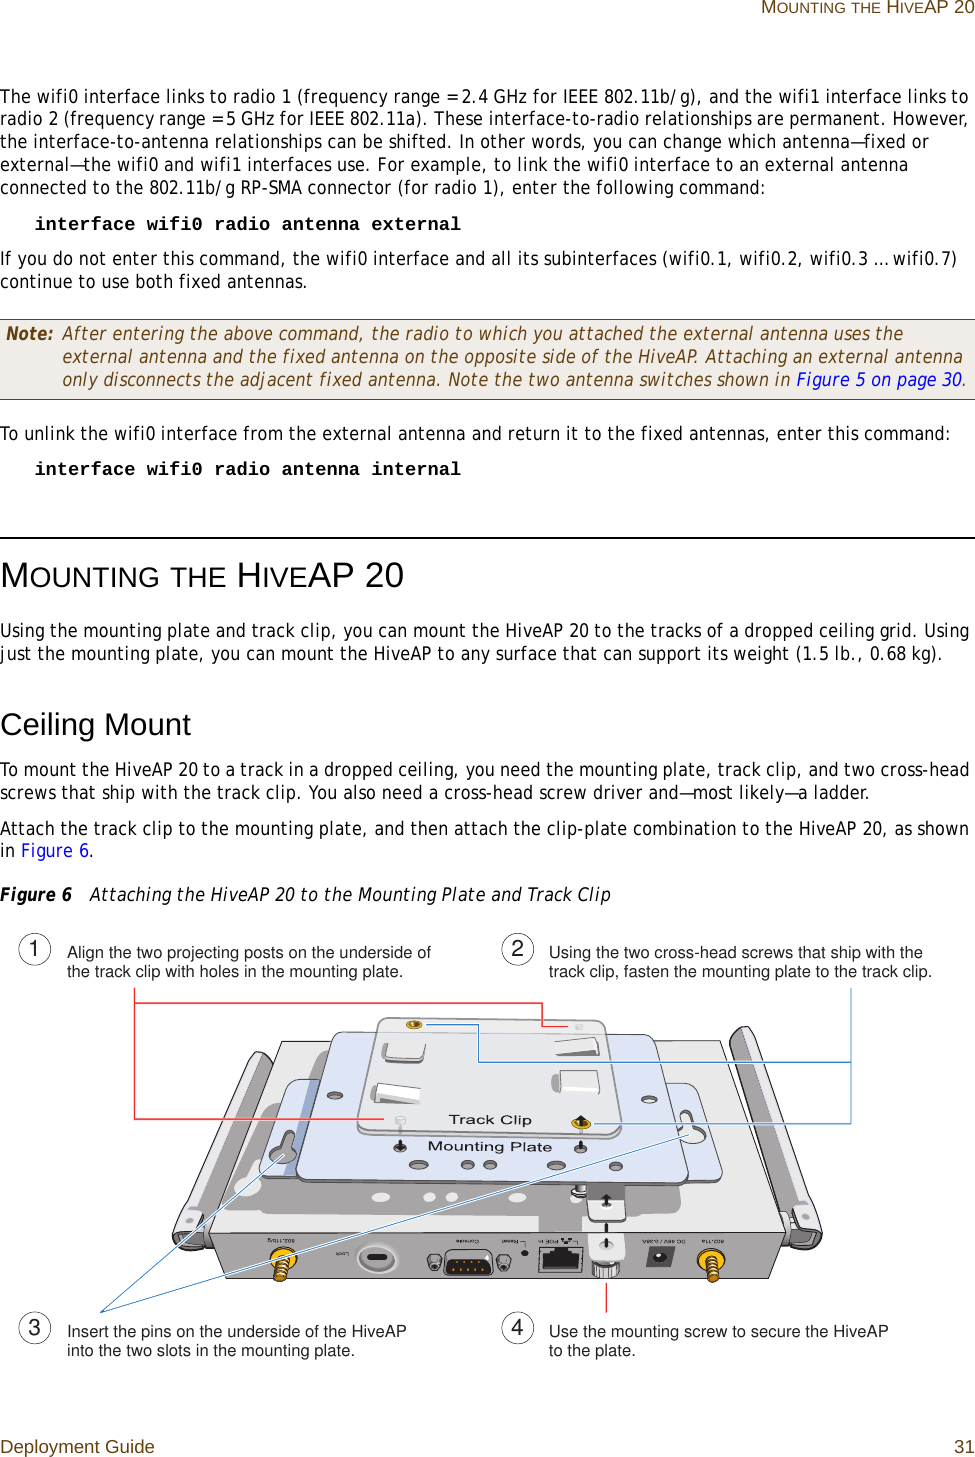 Deployment Guide 31 MOUNTING THE HIVEAP 20The wifi0 interface links to radio 1 (frequency range = 2.4 GHz for IEEE 802.11b/g), and the wifi1 interface links to radio 2 (frequency range = 5 GHz for IEEE 802.11a). These interface-to-radio relationships are permanent. However, the interface-to-antenna relationships can be shifted. In other words, you can change which antenna—fixed or external—the wifi0 and wifi1 interfaces use. For example, to link the wifi0 interface to an external antenna connected to the 802.11b/g RP-SMA connector (for radio 1), enter the following command:interface wifi0 radio antenna external If you do not enter this command, the wifi0 interface and all its subinterfaces (wifi0.1, wifi0.2, wifi0.3 … wifi0.7) continue to use both fixed antennas.To unlink the wifi0 interface from the external antenna and return it to the fixed antennas, enter this command:interface wifi0 radio antenna internalMOUNTING THE HIVEAP 20Using the mounting plate and track clip, you can mount the HiveAP 20 to the tracks of a dropped ceiling grid. Using just the mounting plate, you can mount the HiveAP to any surface that can support its weight (1.5 lb., 0.68 kg).Ceiling MountTo mount the HiveAP 20 to a track in a dropped ceiling, you need the mounting plate, track clip, and two cross-head screws that ship with the track clip. You also need a cross-head screw driver and—most likely—a ladder.Attach the track clip to the mounting plate, and then attach the clip-plate combination to the HiveAP 20, as shown in Figure 6.Figure 6  Attaching the HiveAP 20 to the Mounting Plate and Track ClipNote: After entering the above command, the radio to which you attached the external antenna uses the external antenna and the fixed antenna on the opposite side of the HiveAP. Attaching an external antenna only disconnects the adjacent fixed antenna. Note the two antenna switches shown in Figure 5 on page 30.Align the two projecting posts on the underside of the track clip with holes in the mounting plate. Using the two cross-head screws that ship with the track clip, fasten the mounting plate to the track clip.Insert the pins on the underside of the HiveAP into the two slots in the mounting plate. Use the mounting screw to secure the HiveAP to the plate.1234